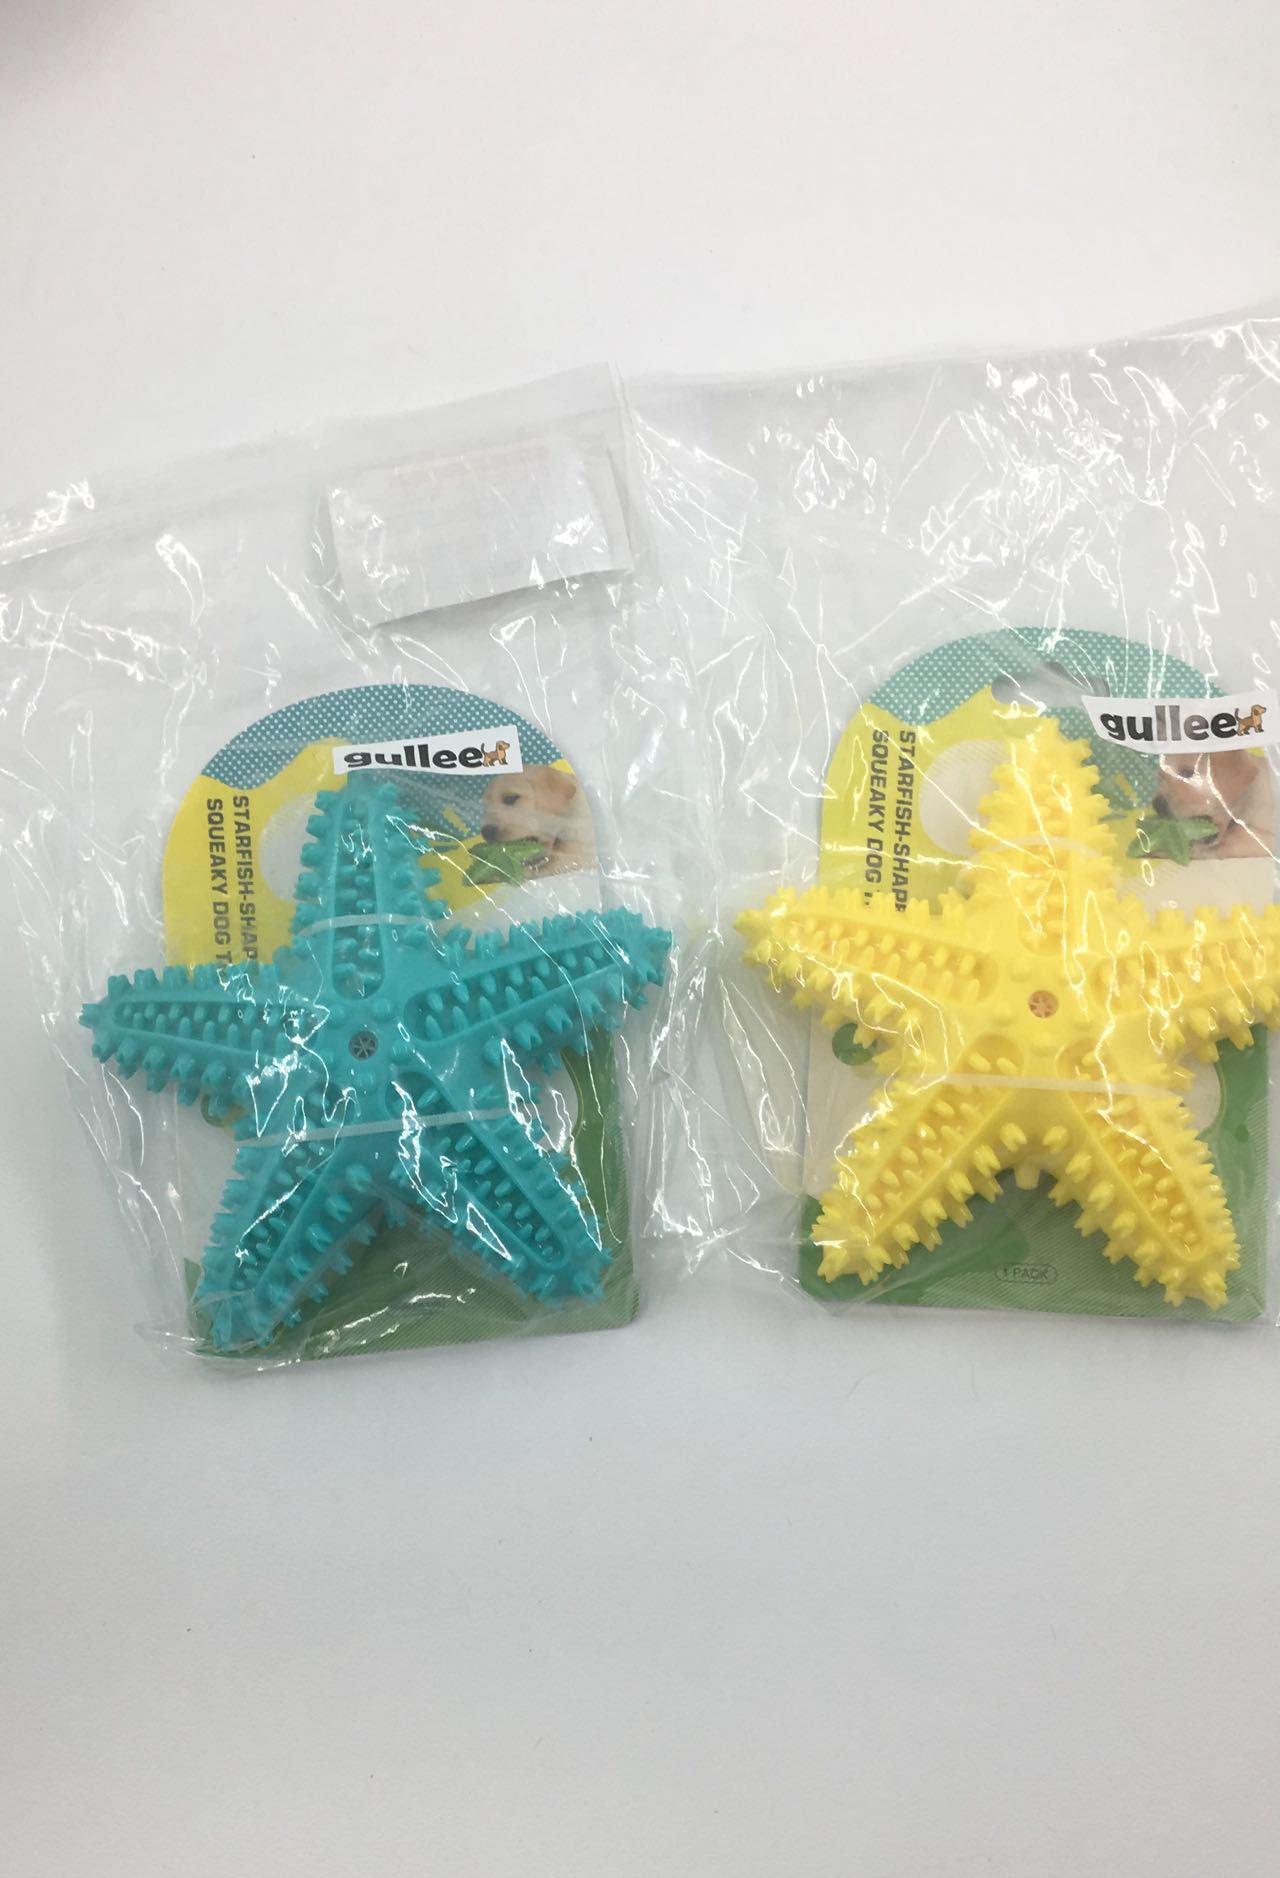 Packing Image Of Star Shape Dog Chew Toys